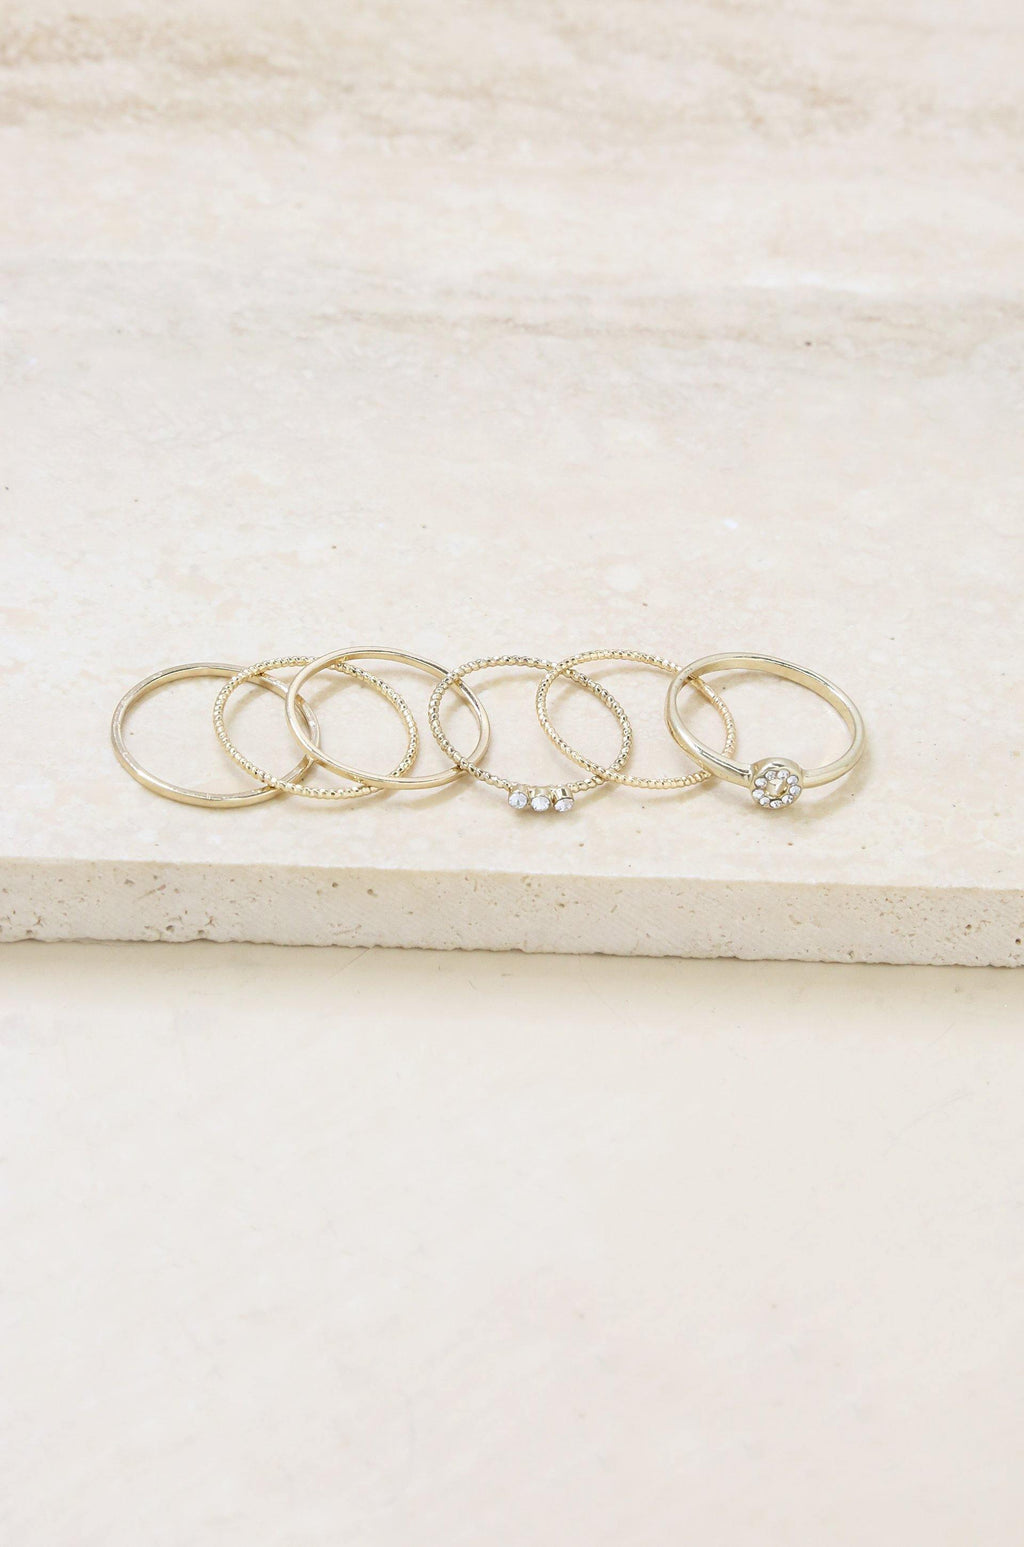 Dainty 18k Gold Plated Stacking Ring Set of 6 - The Gallant Way